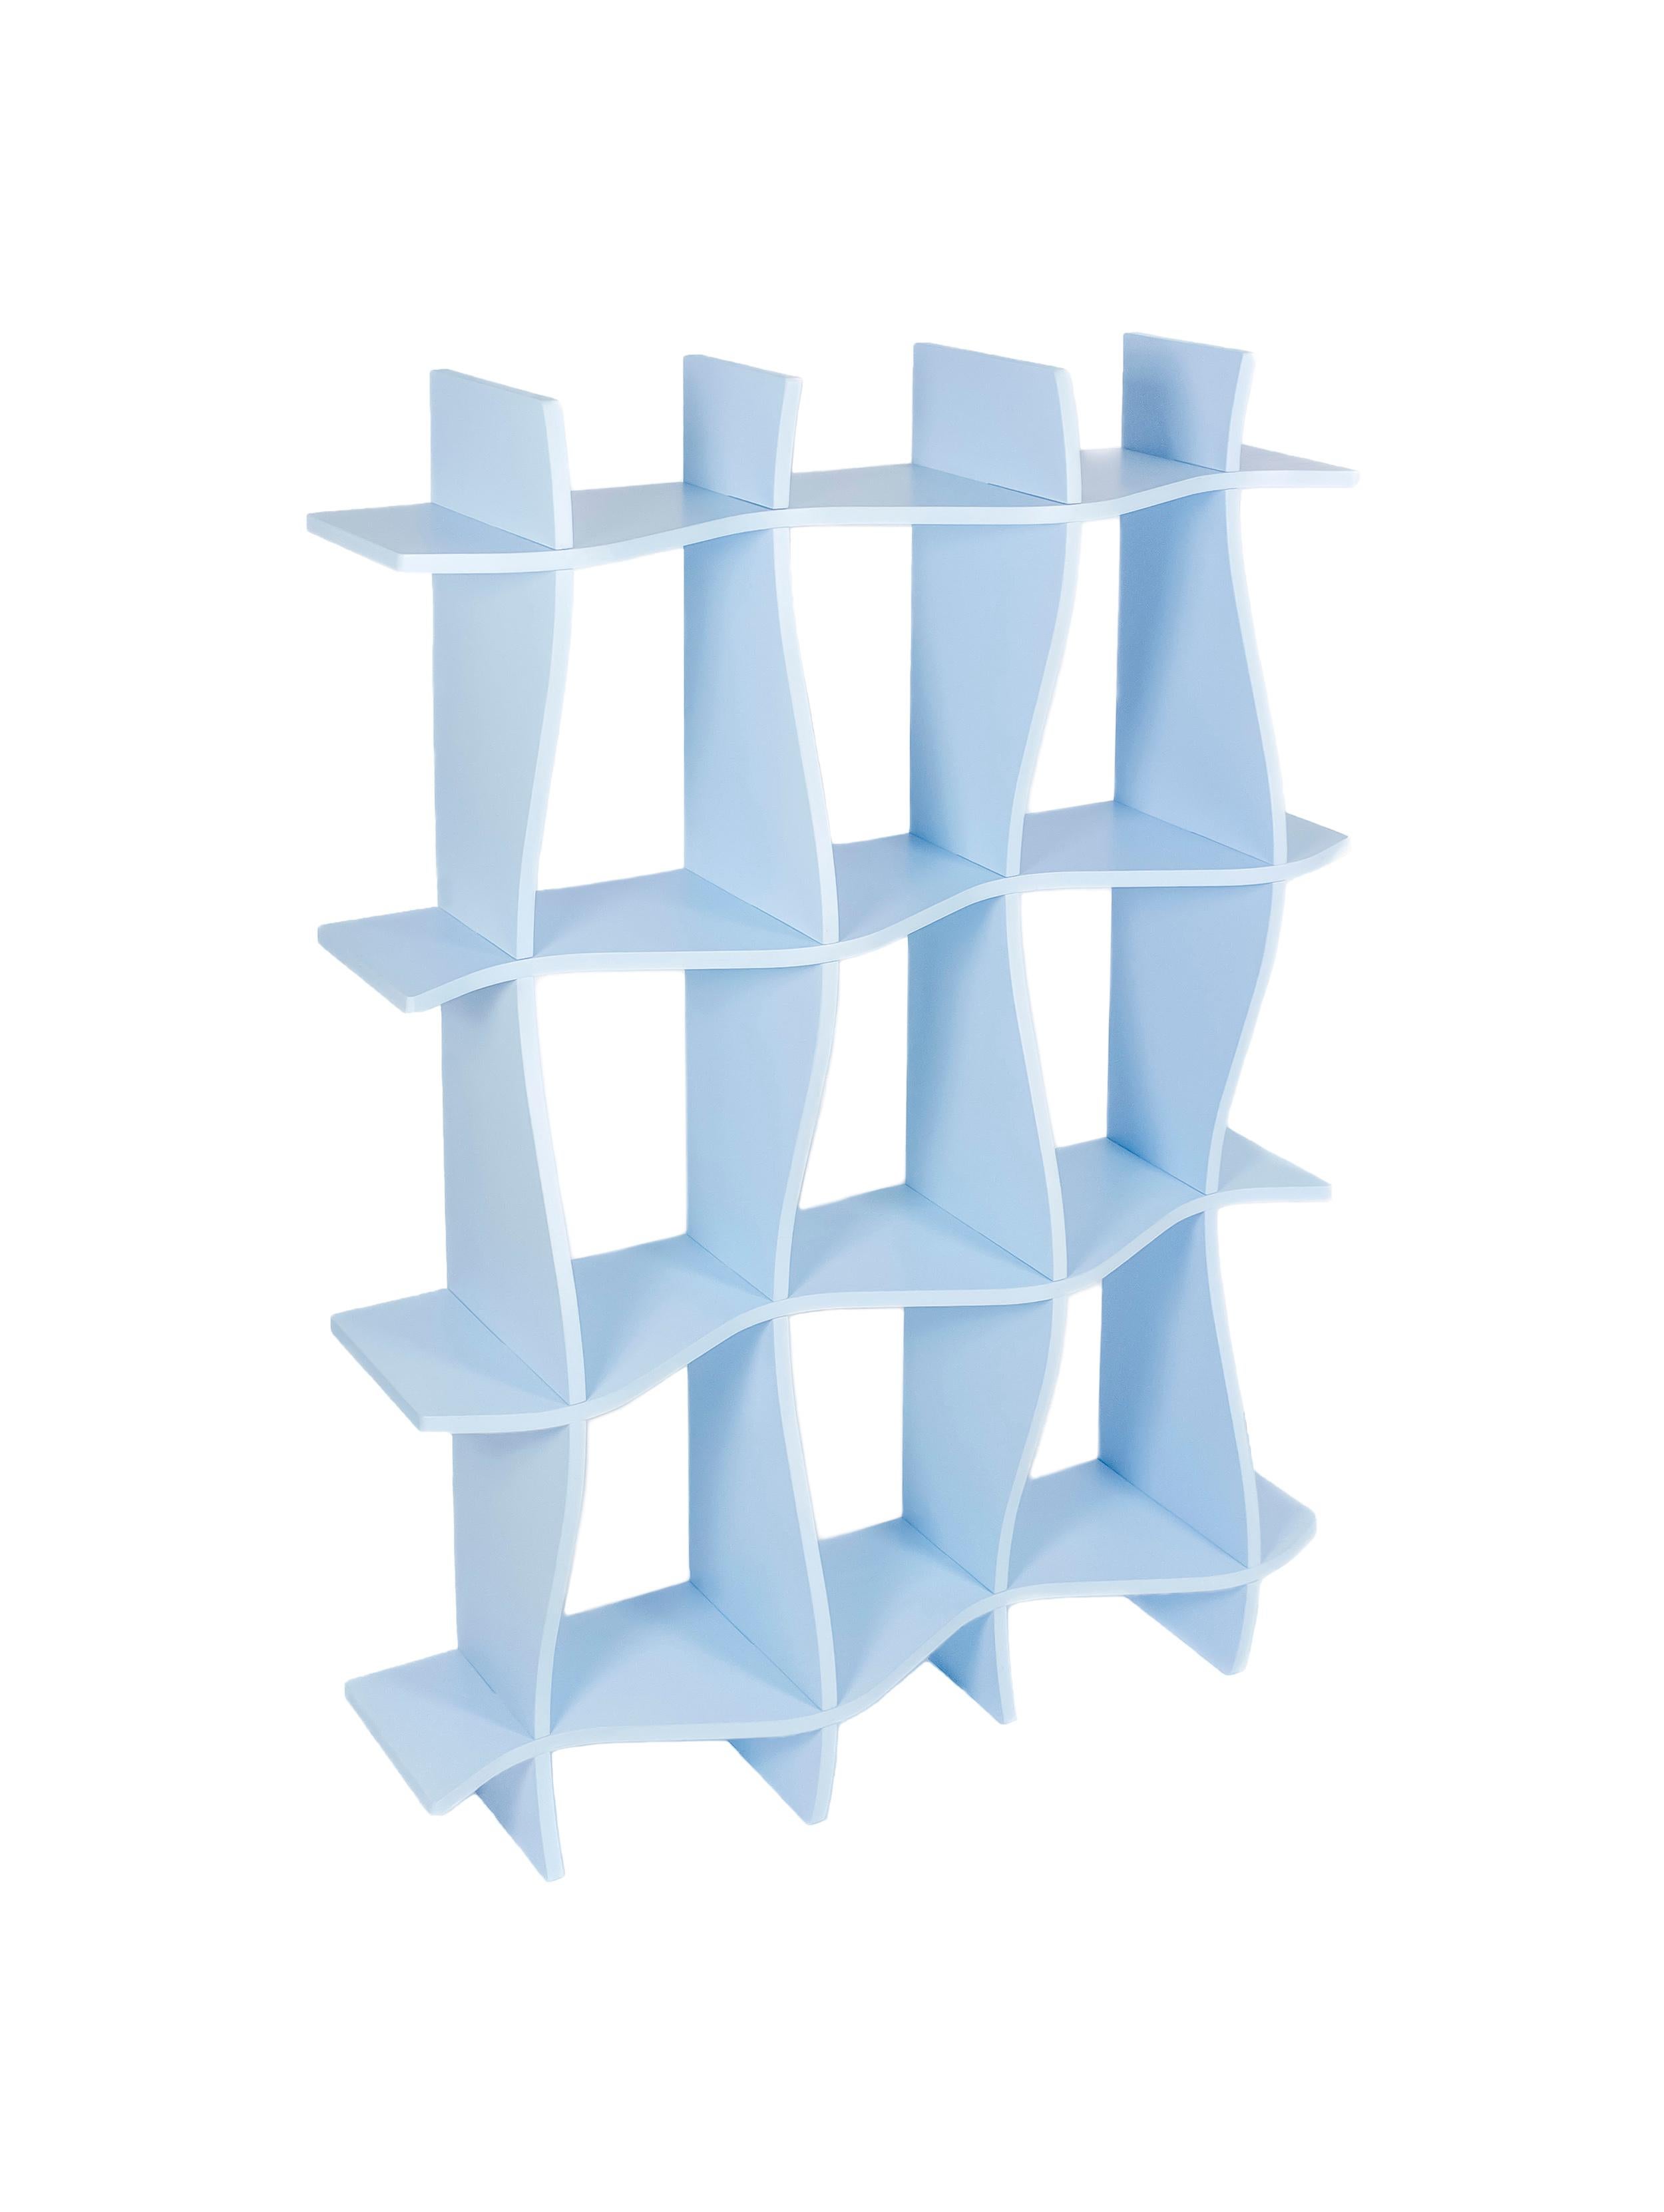 A multi directional wavy shelf designed for small and large spaces. Place it horizontally or vertically, you decide!

Material: Wood
Colors: Milk Blue
Dimensions: W 59 x H 44 x D 12 in (150 x 112 x 30 cm)
Self Assembly - Shelf is delivered in a flat